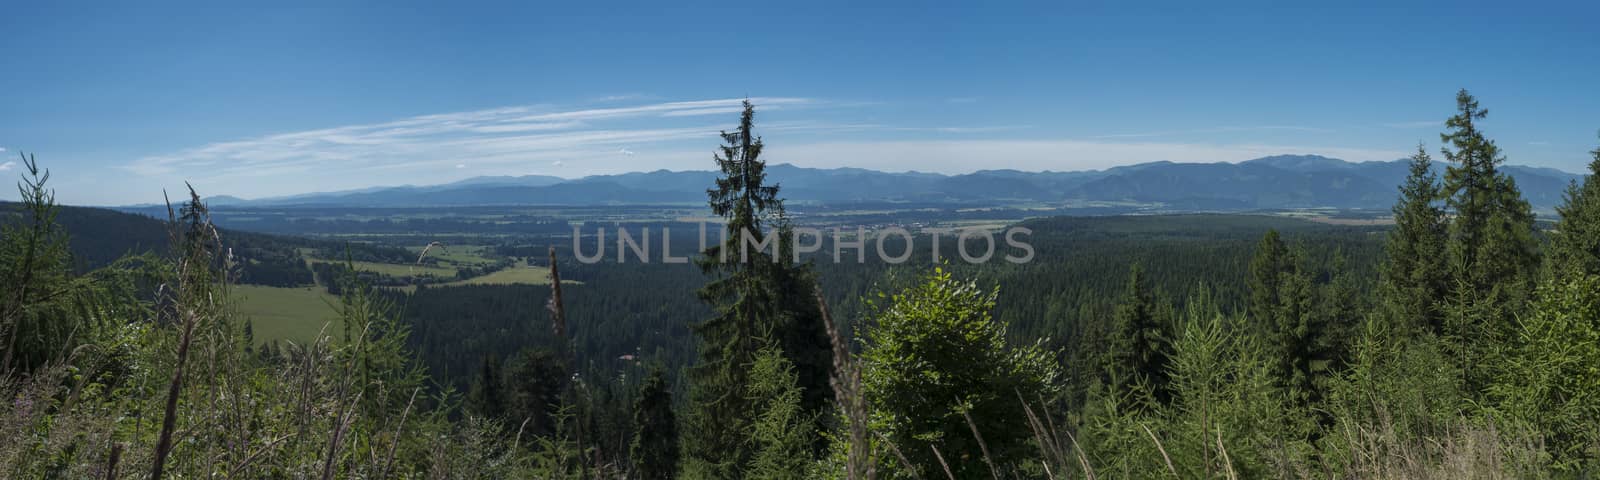 View from tatra mountains trail on valley with Tatranska lomnice and blue misty slopes of hills in the distance. Pine trees and coniferous forest hills, blue sky. Travel background, tatra mountain in summer, Slovakia.